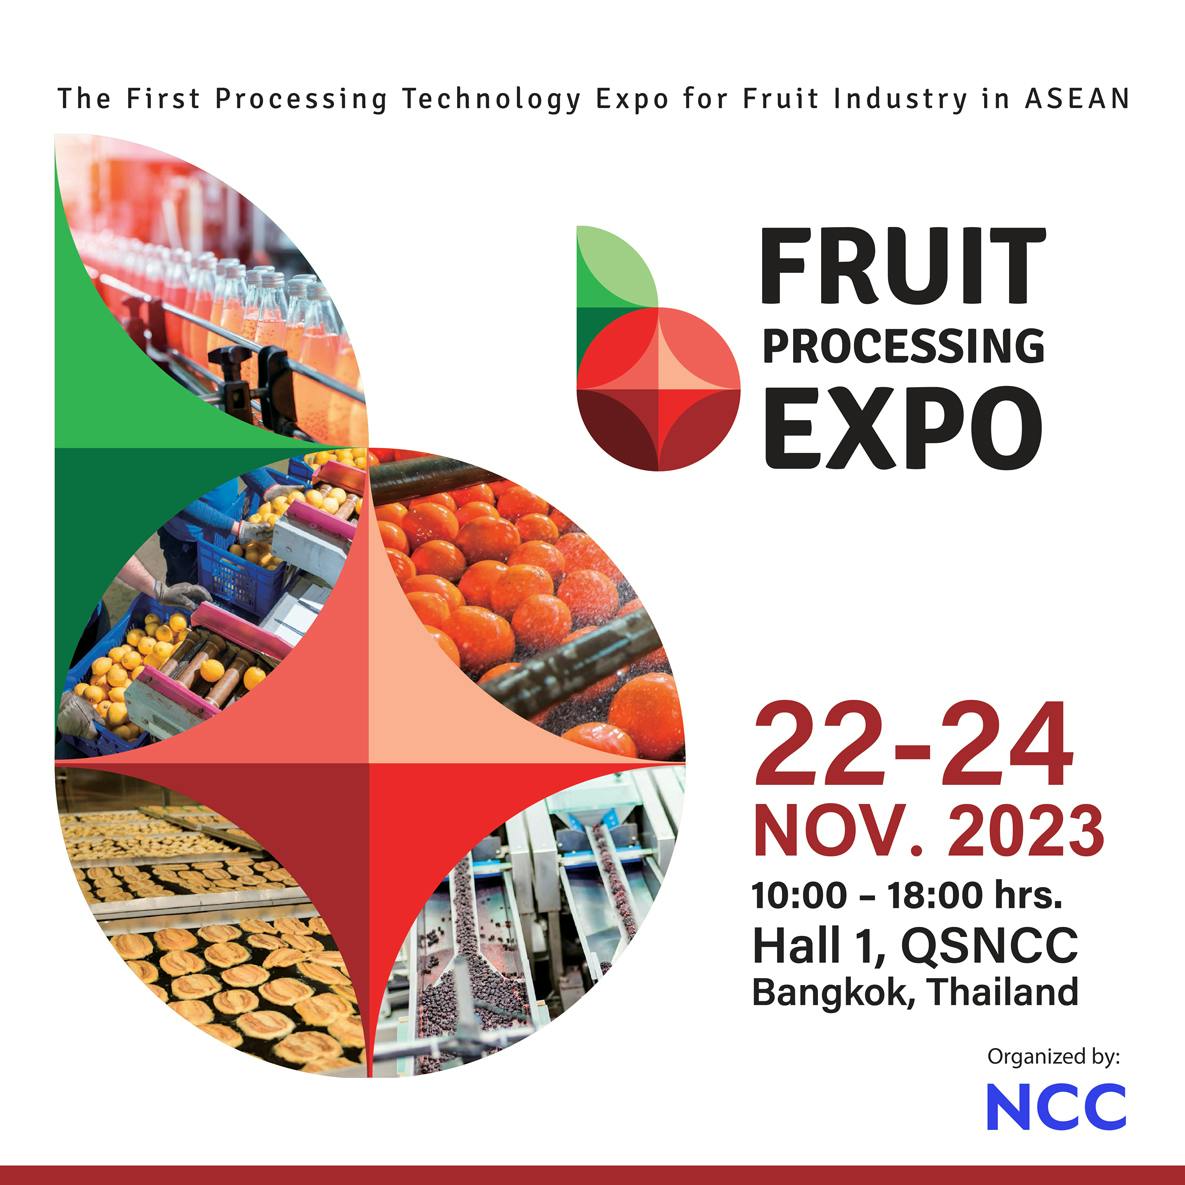 Fruit Processing Expo 2023